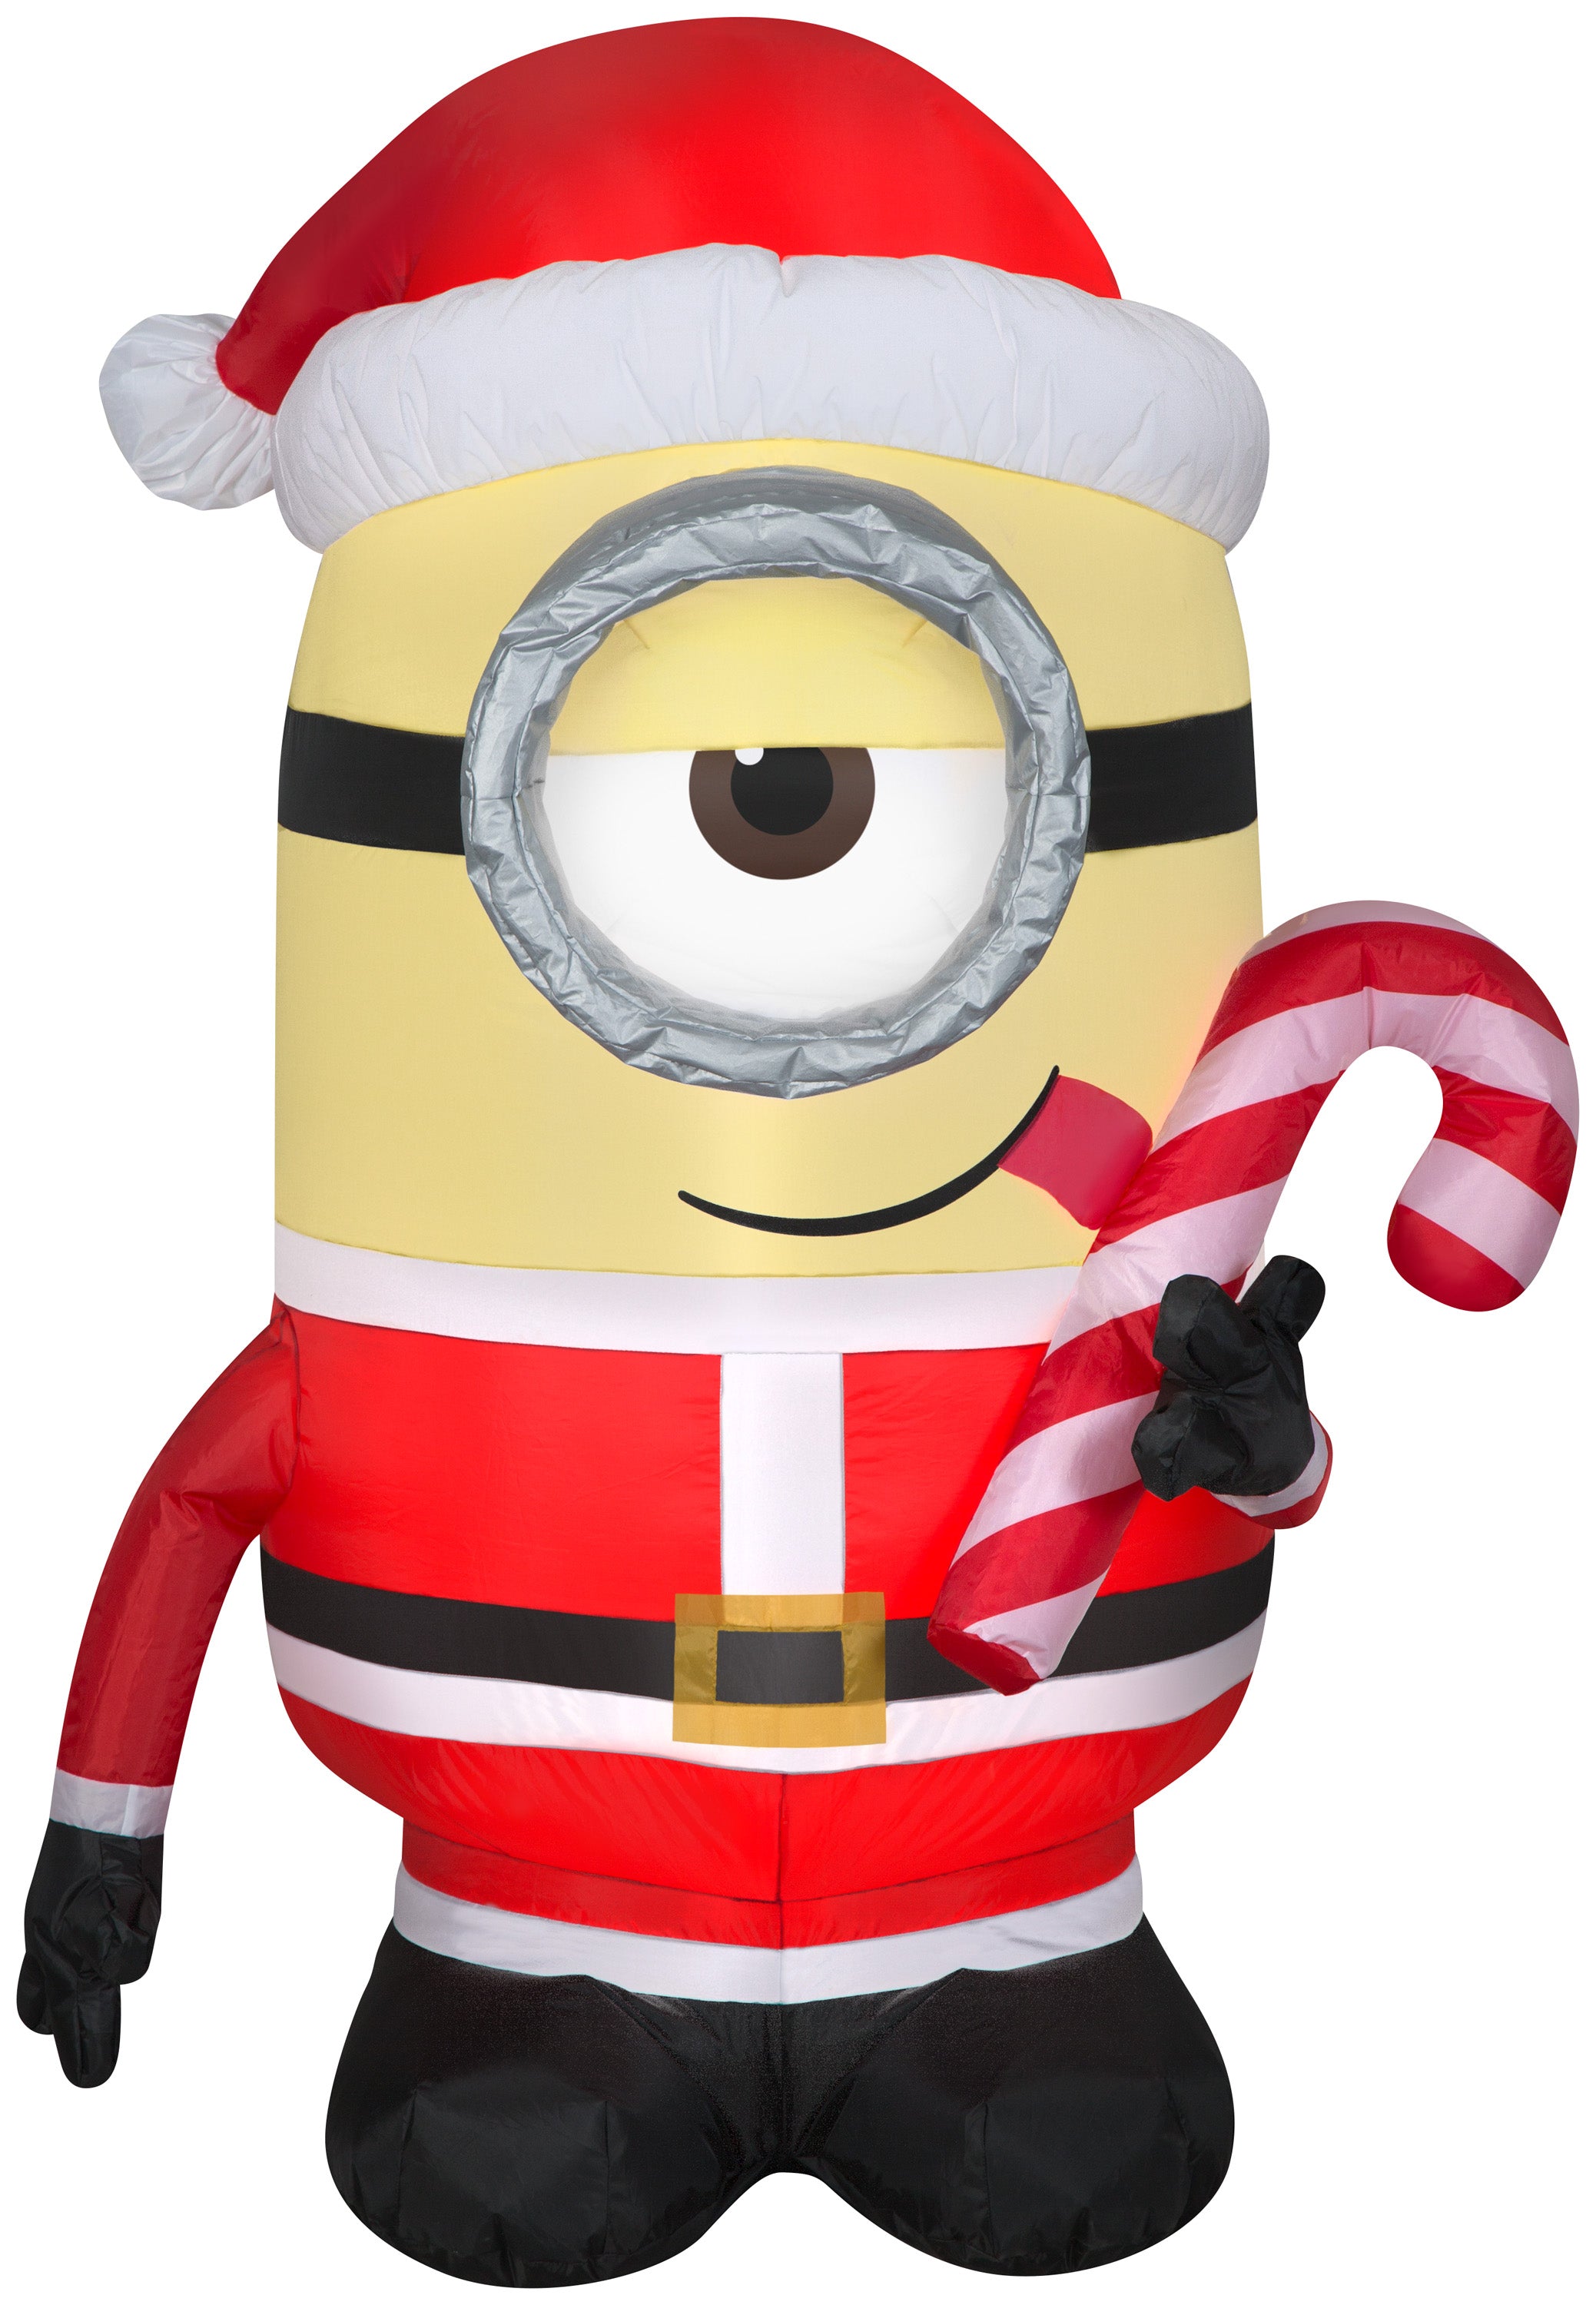 Gemmy Christmas Airblown Inflatable Inflatable Minion Stuart Licking Candy Cane, 4.5 ft Tall, yellow